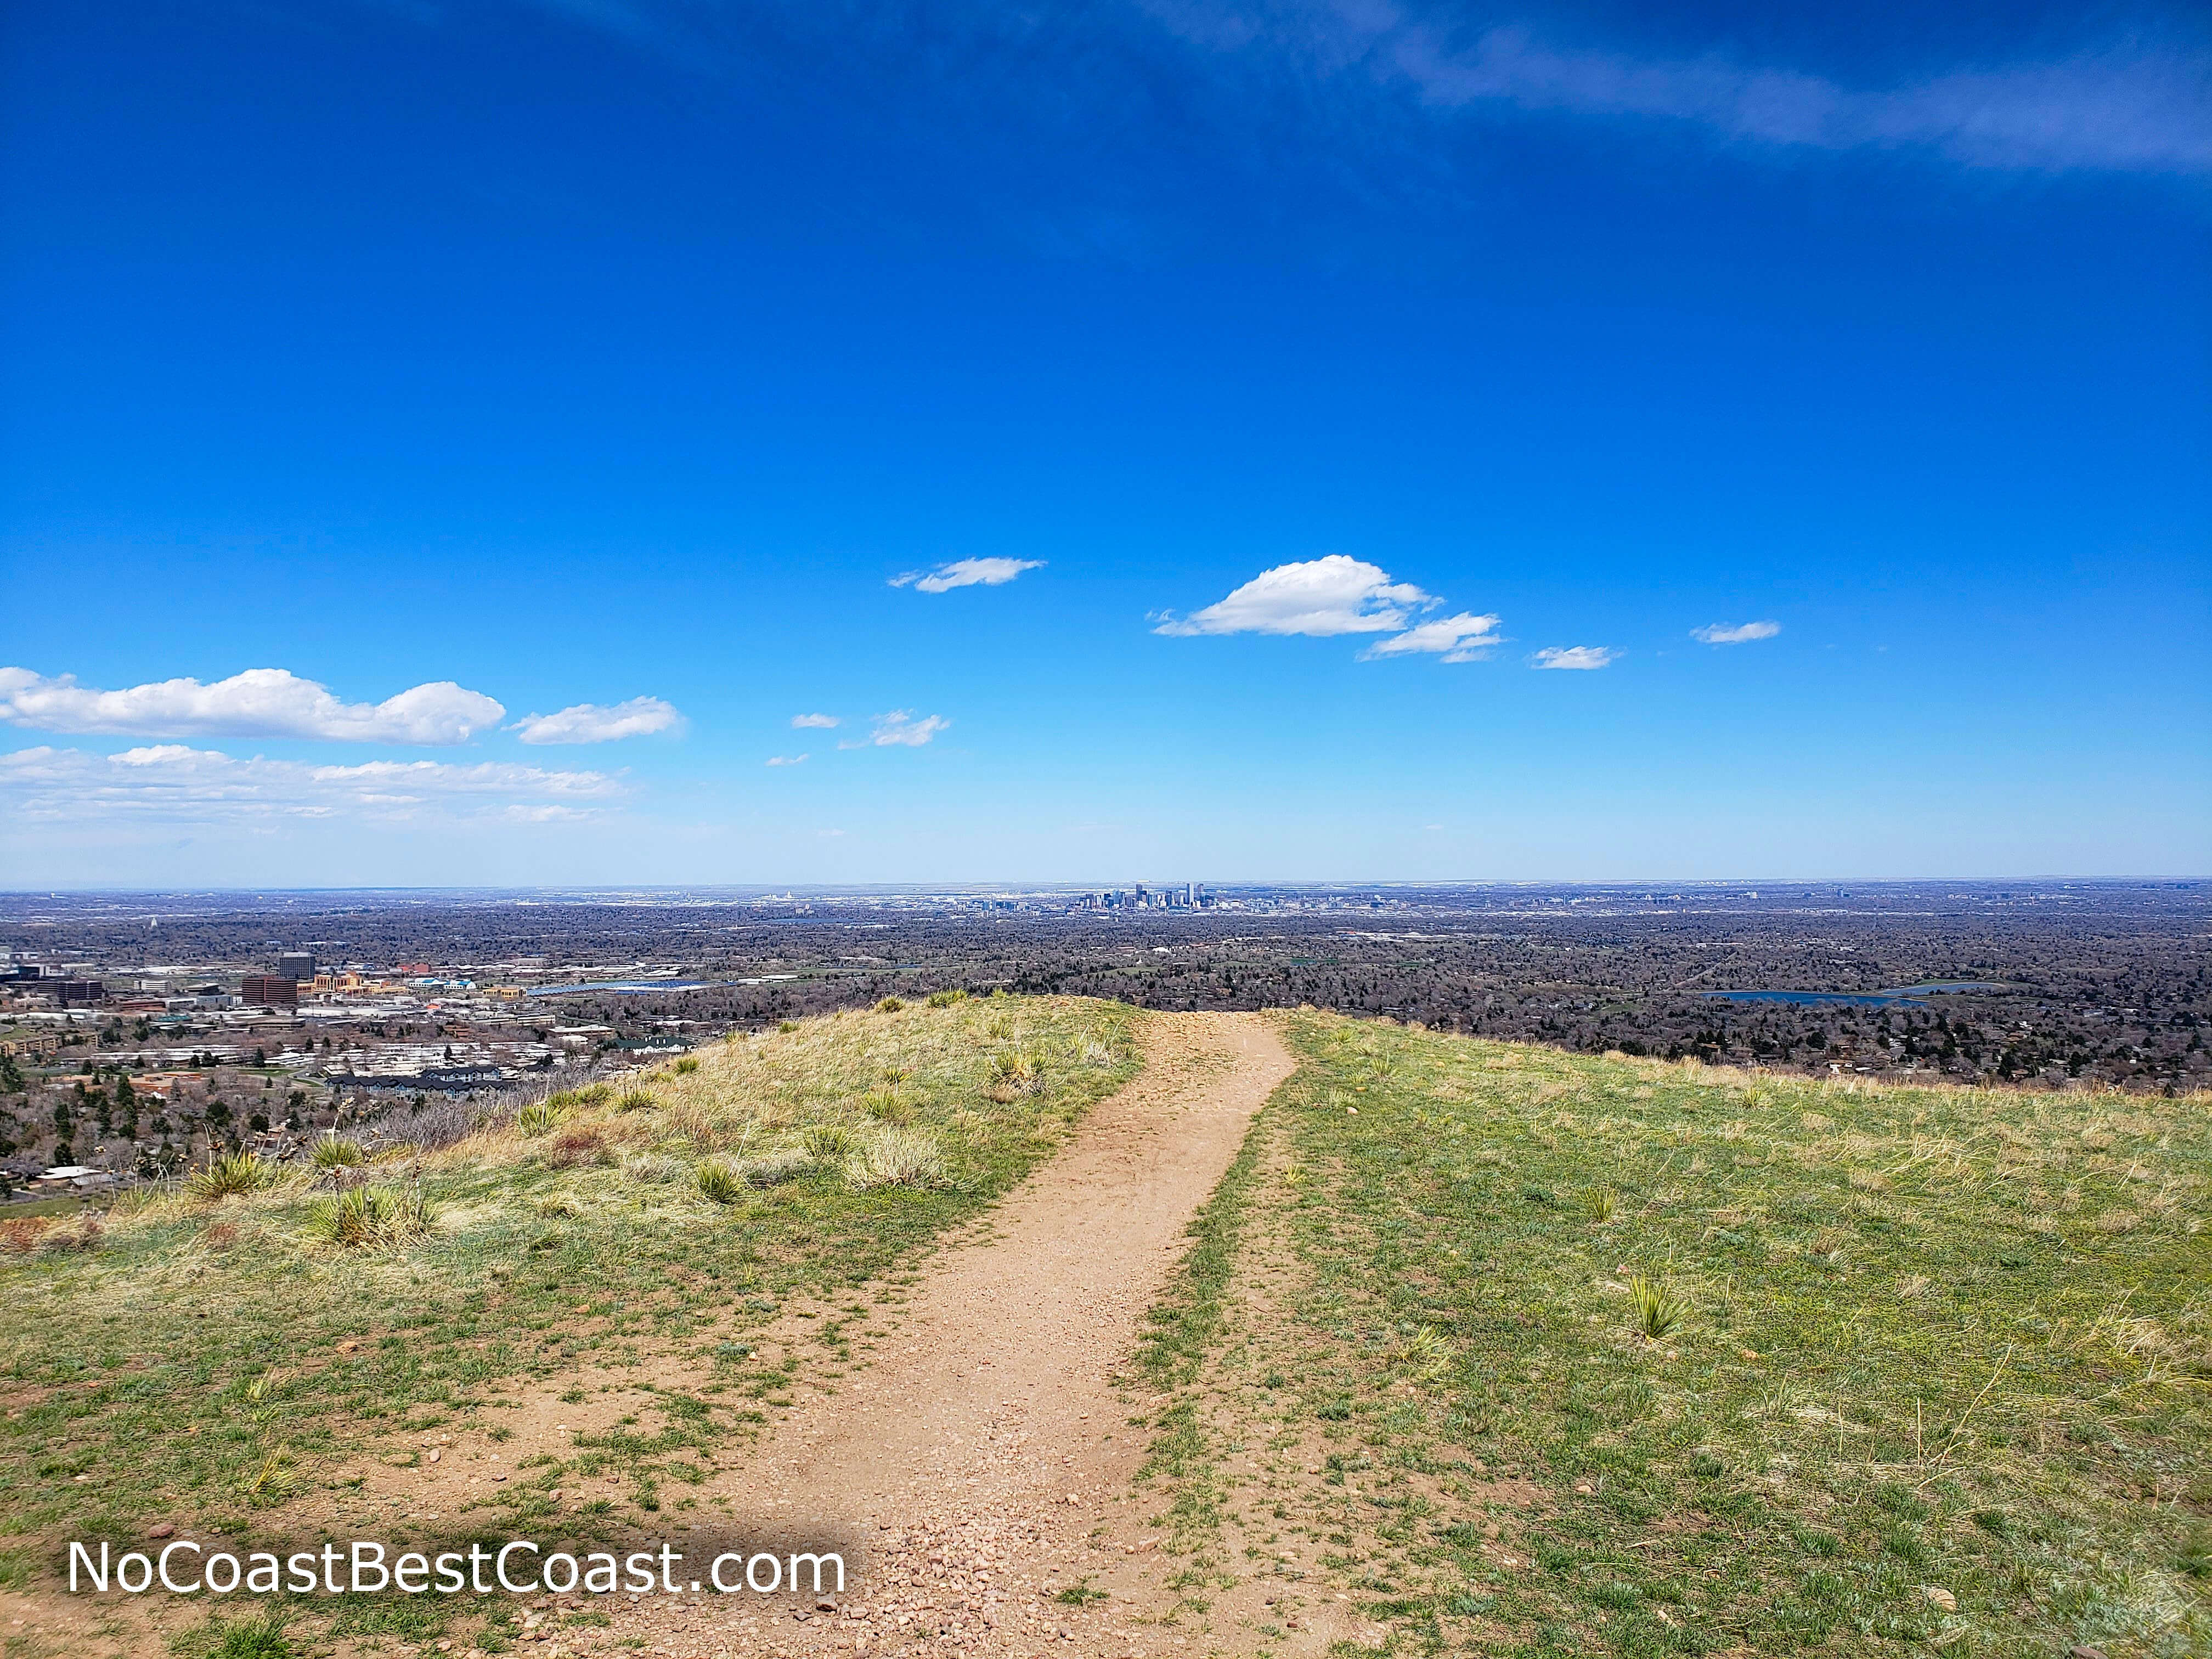 The Denver skyline from the Green Mountain Trail